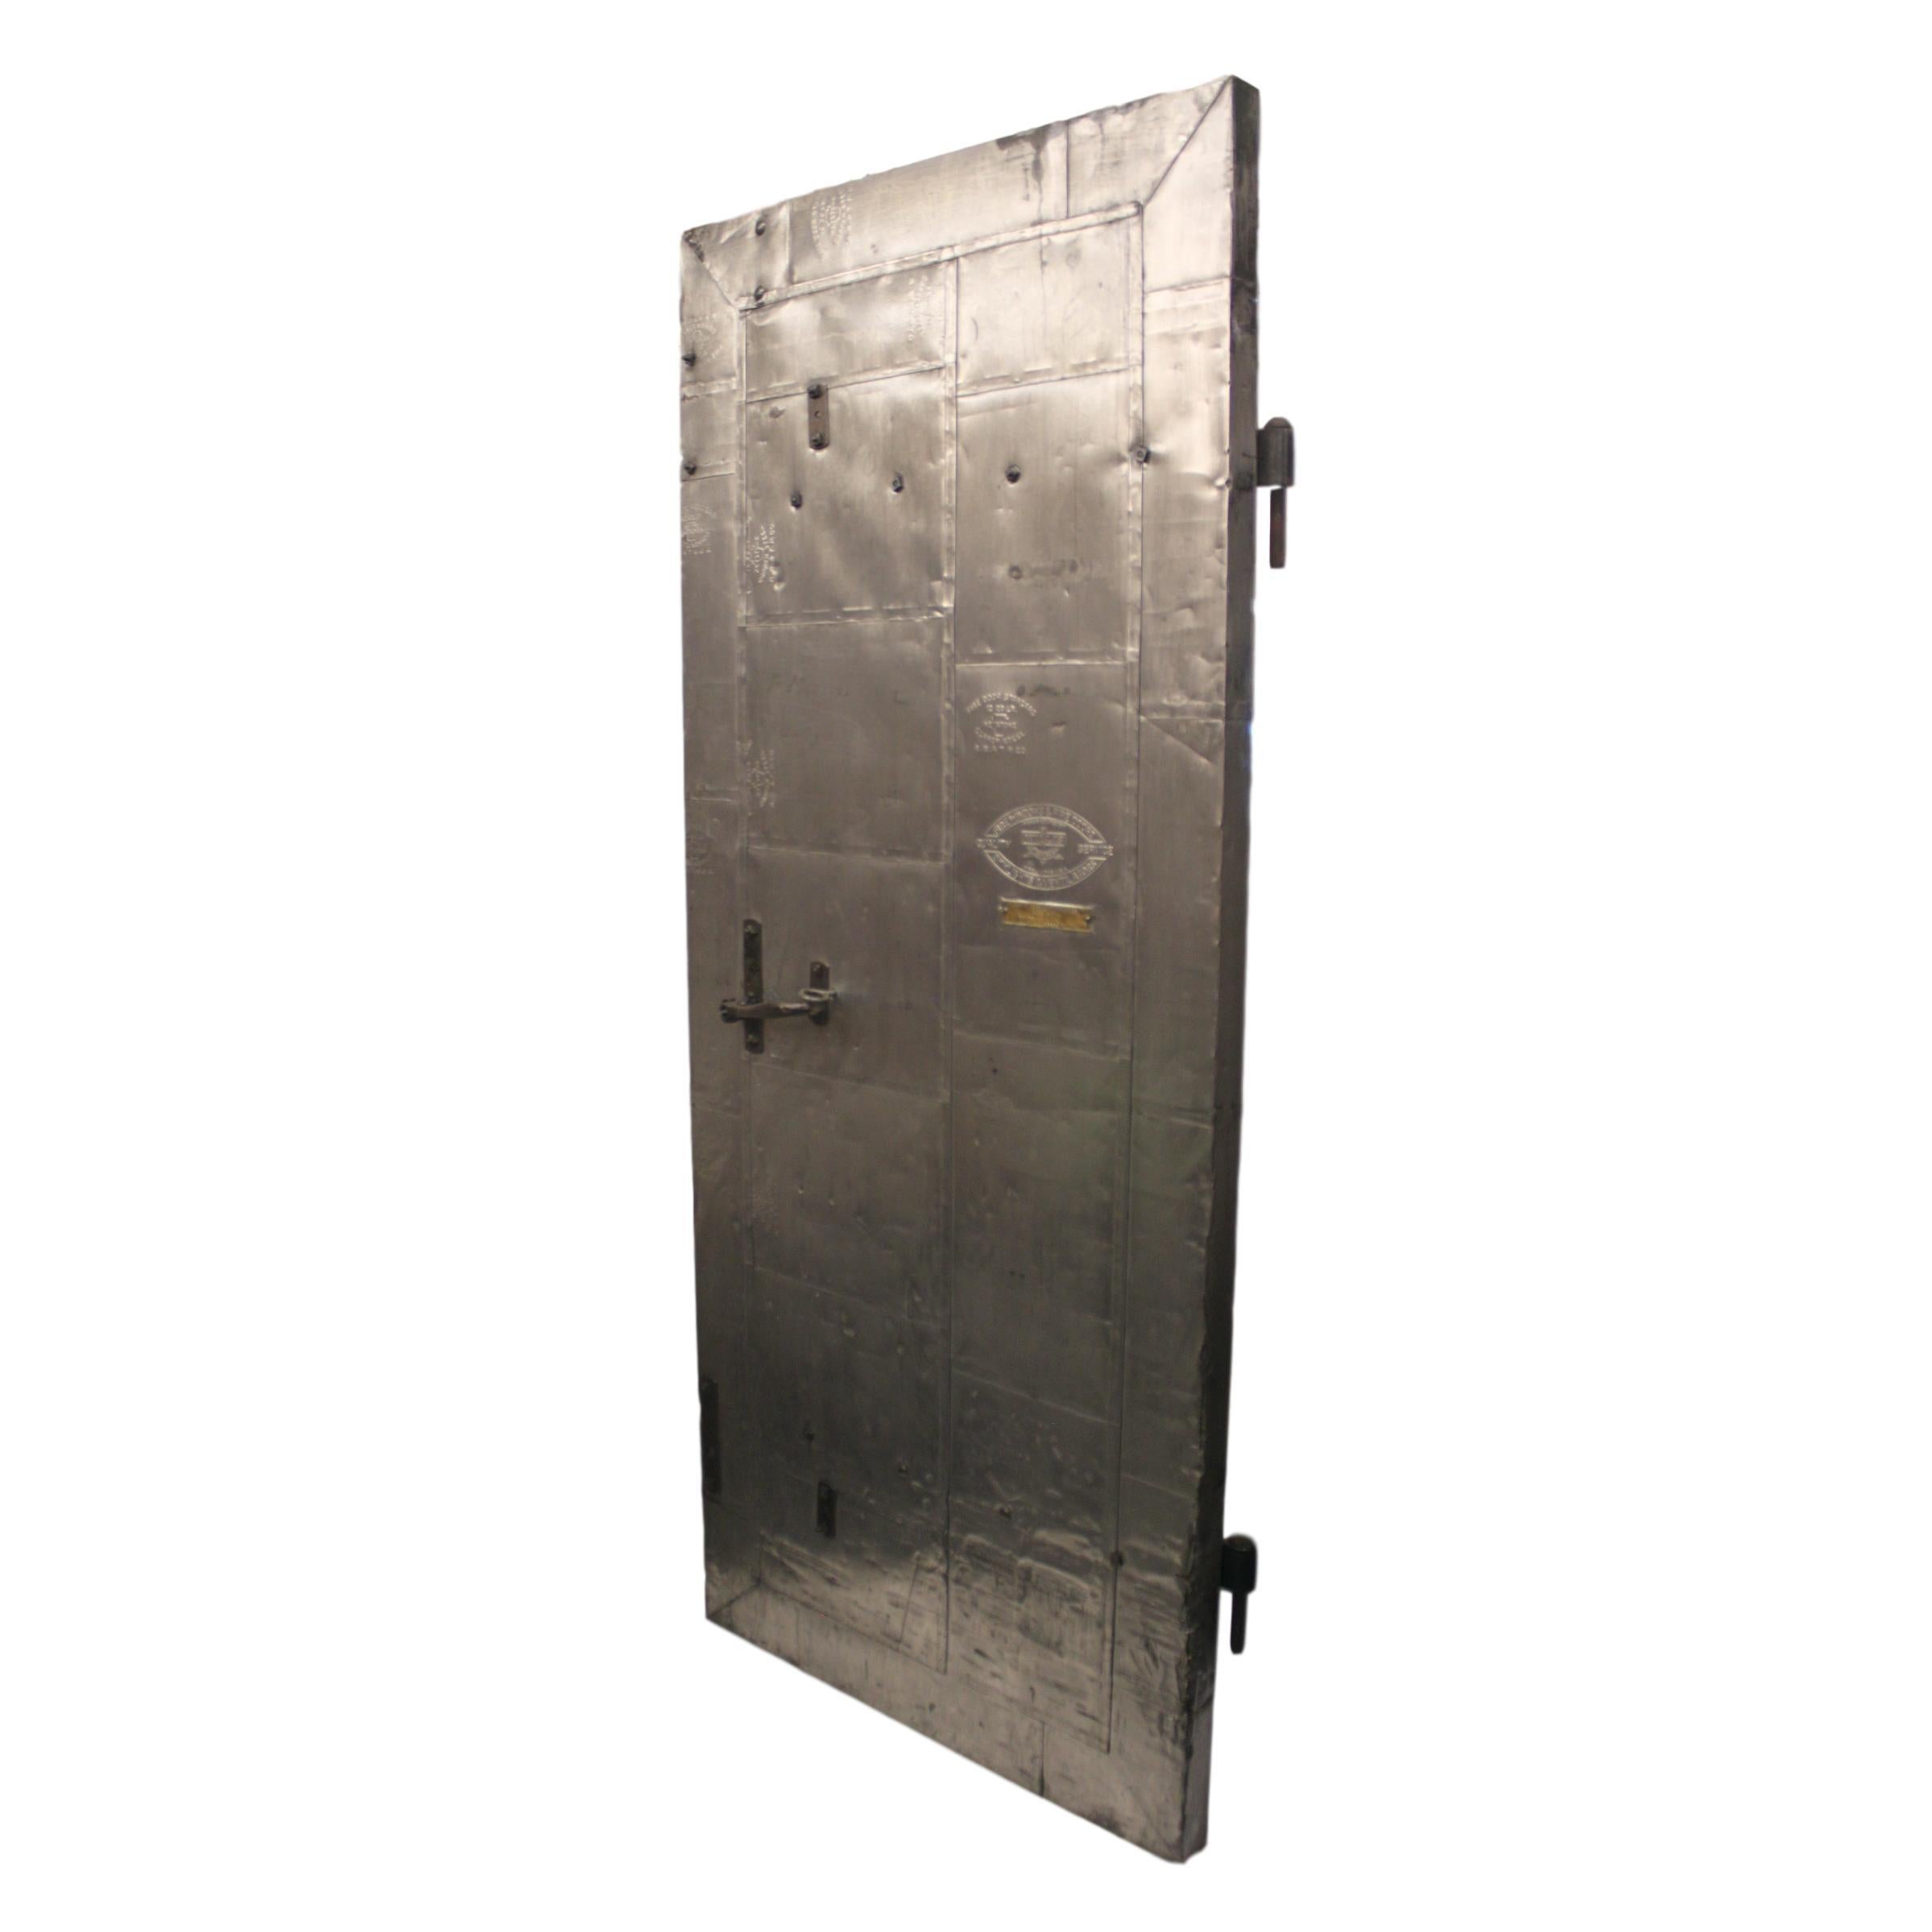 This heavy duty industrial fire door features a solid wood core completely sheathed in individual fire-proof steel-cladding and original hardware. Manufactured circa 1915 by Willis Fire Windows & Fire Doors of Galesburg, IL. Door features an